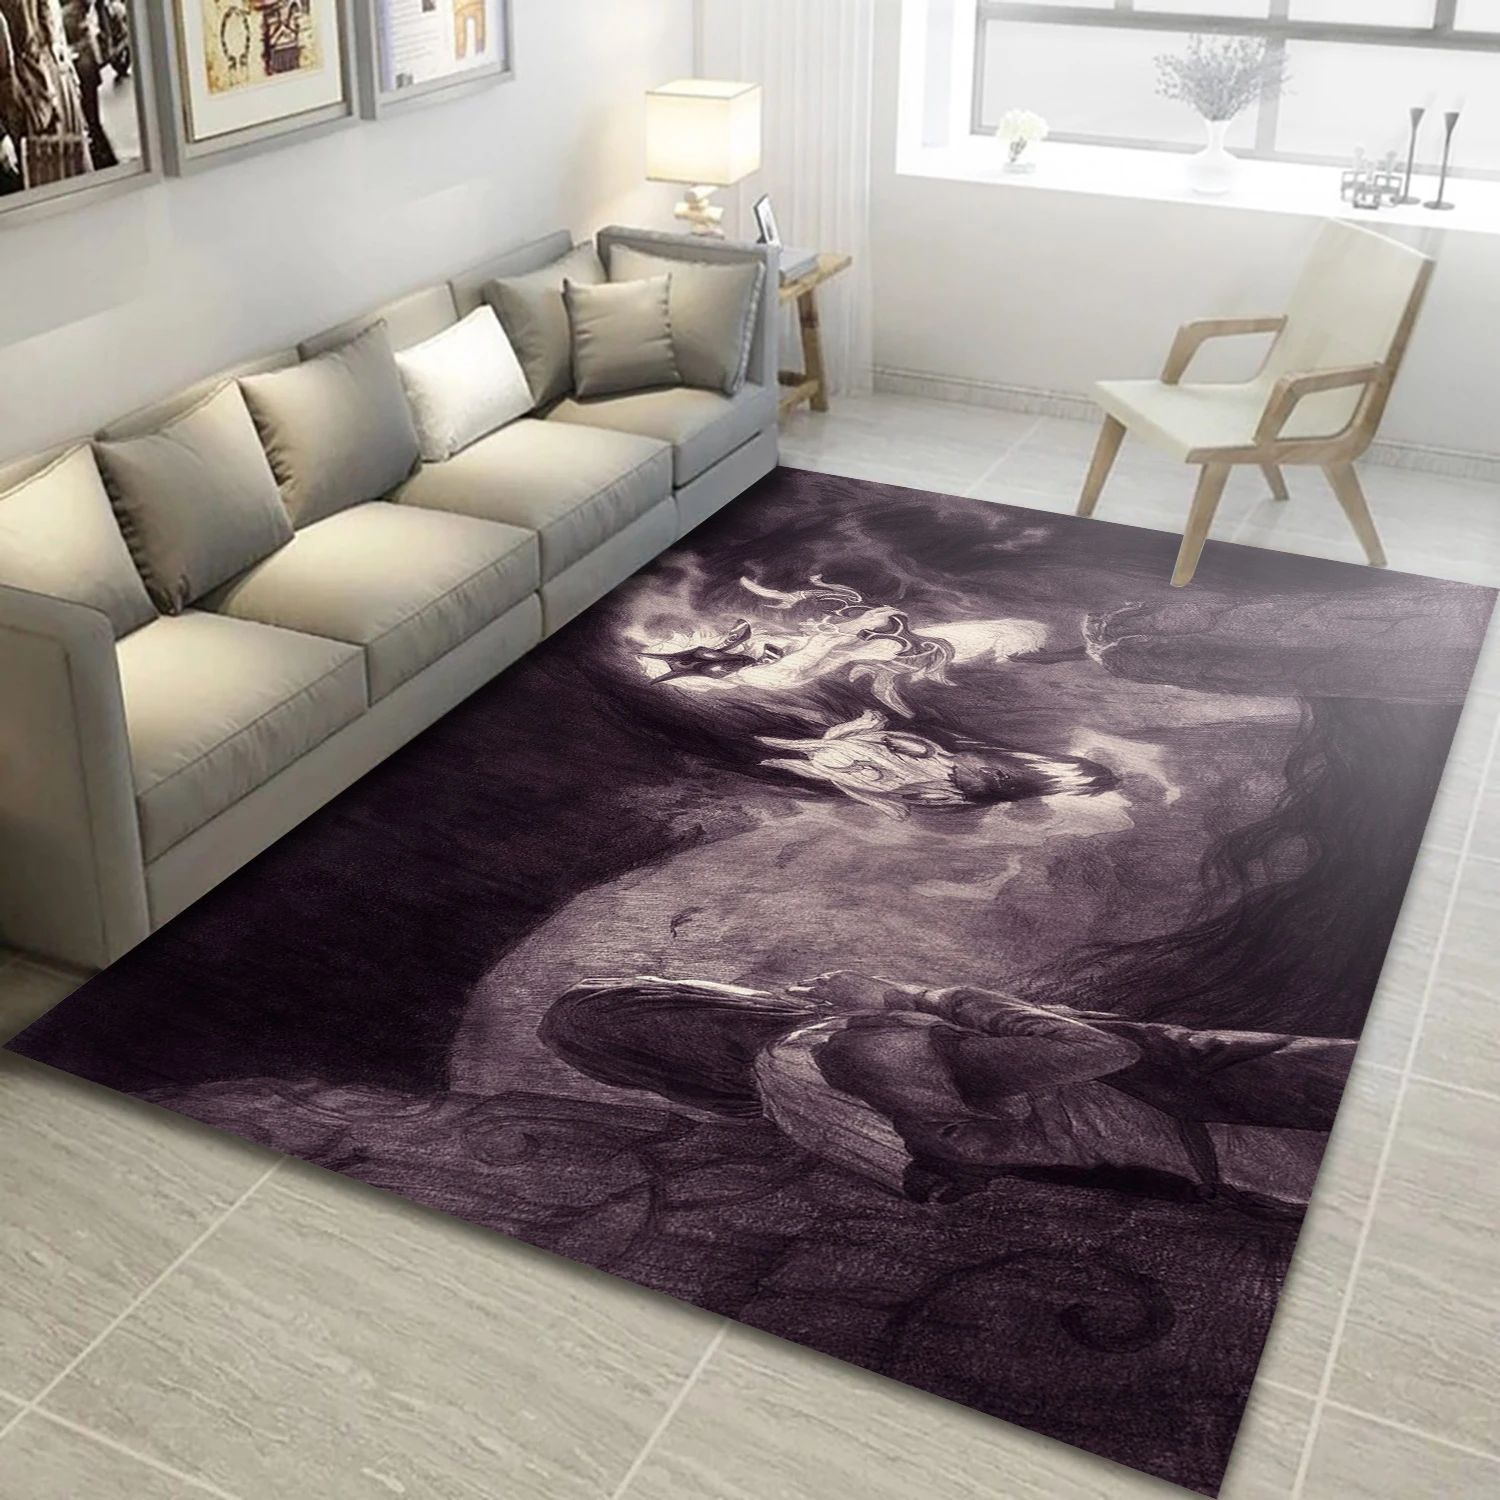 League Of Legends Game Area Rug Carpet, Bedroom Rug - Family Gift US Decor - Indoor Outdoor Rugs